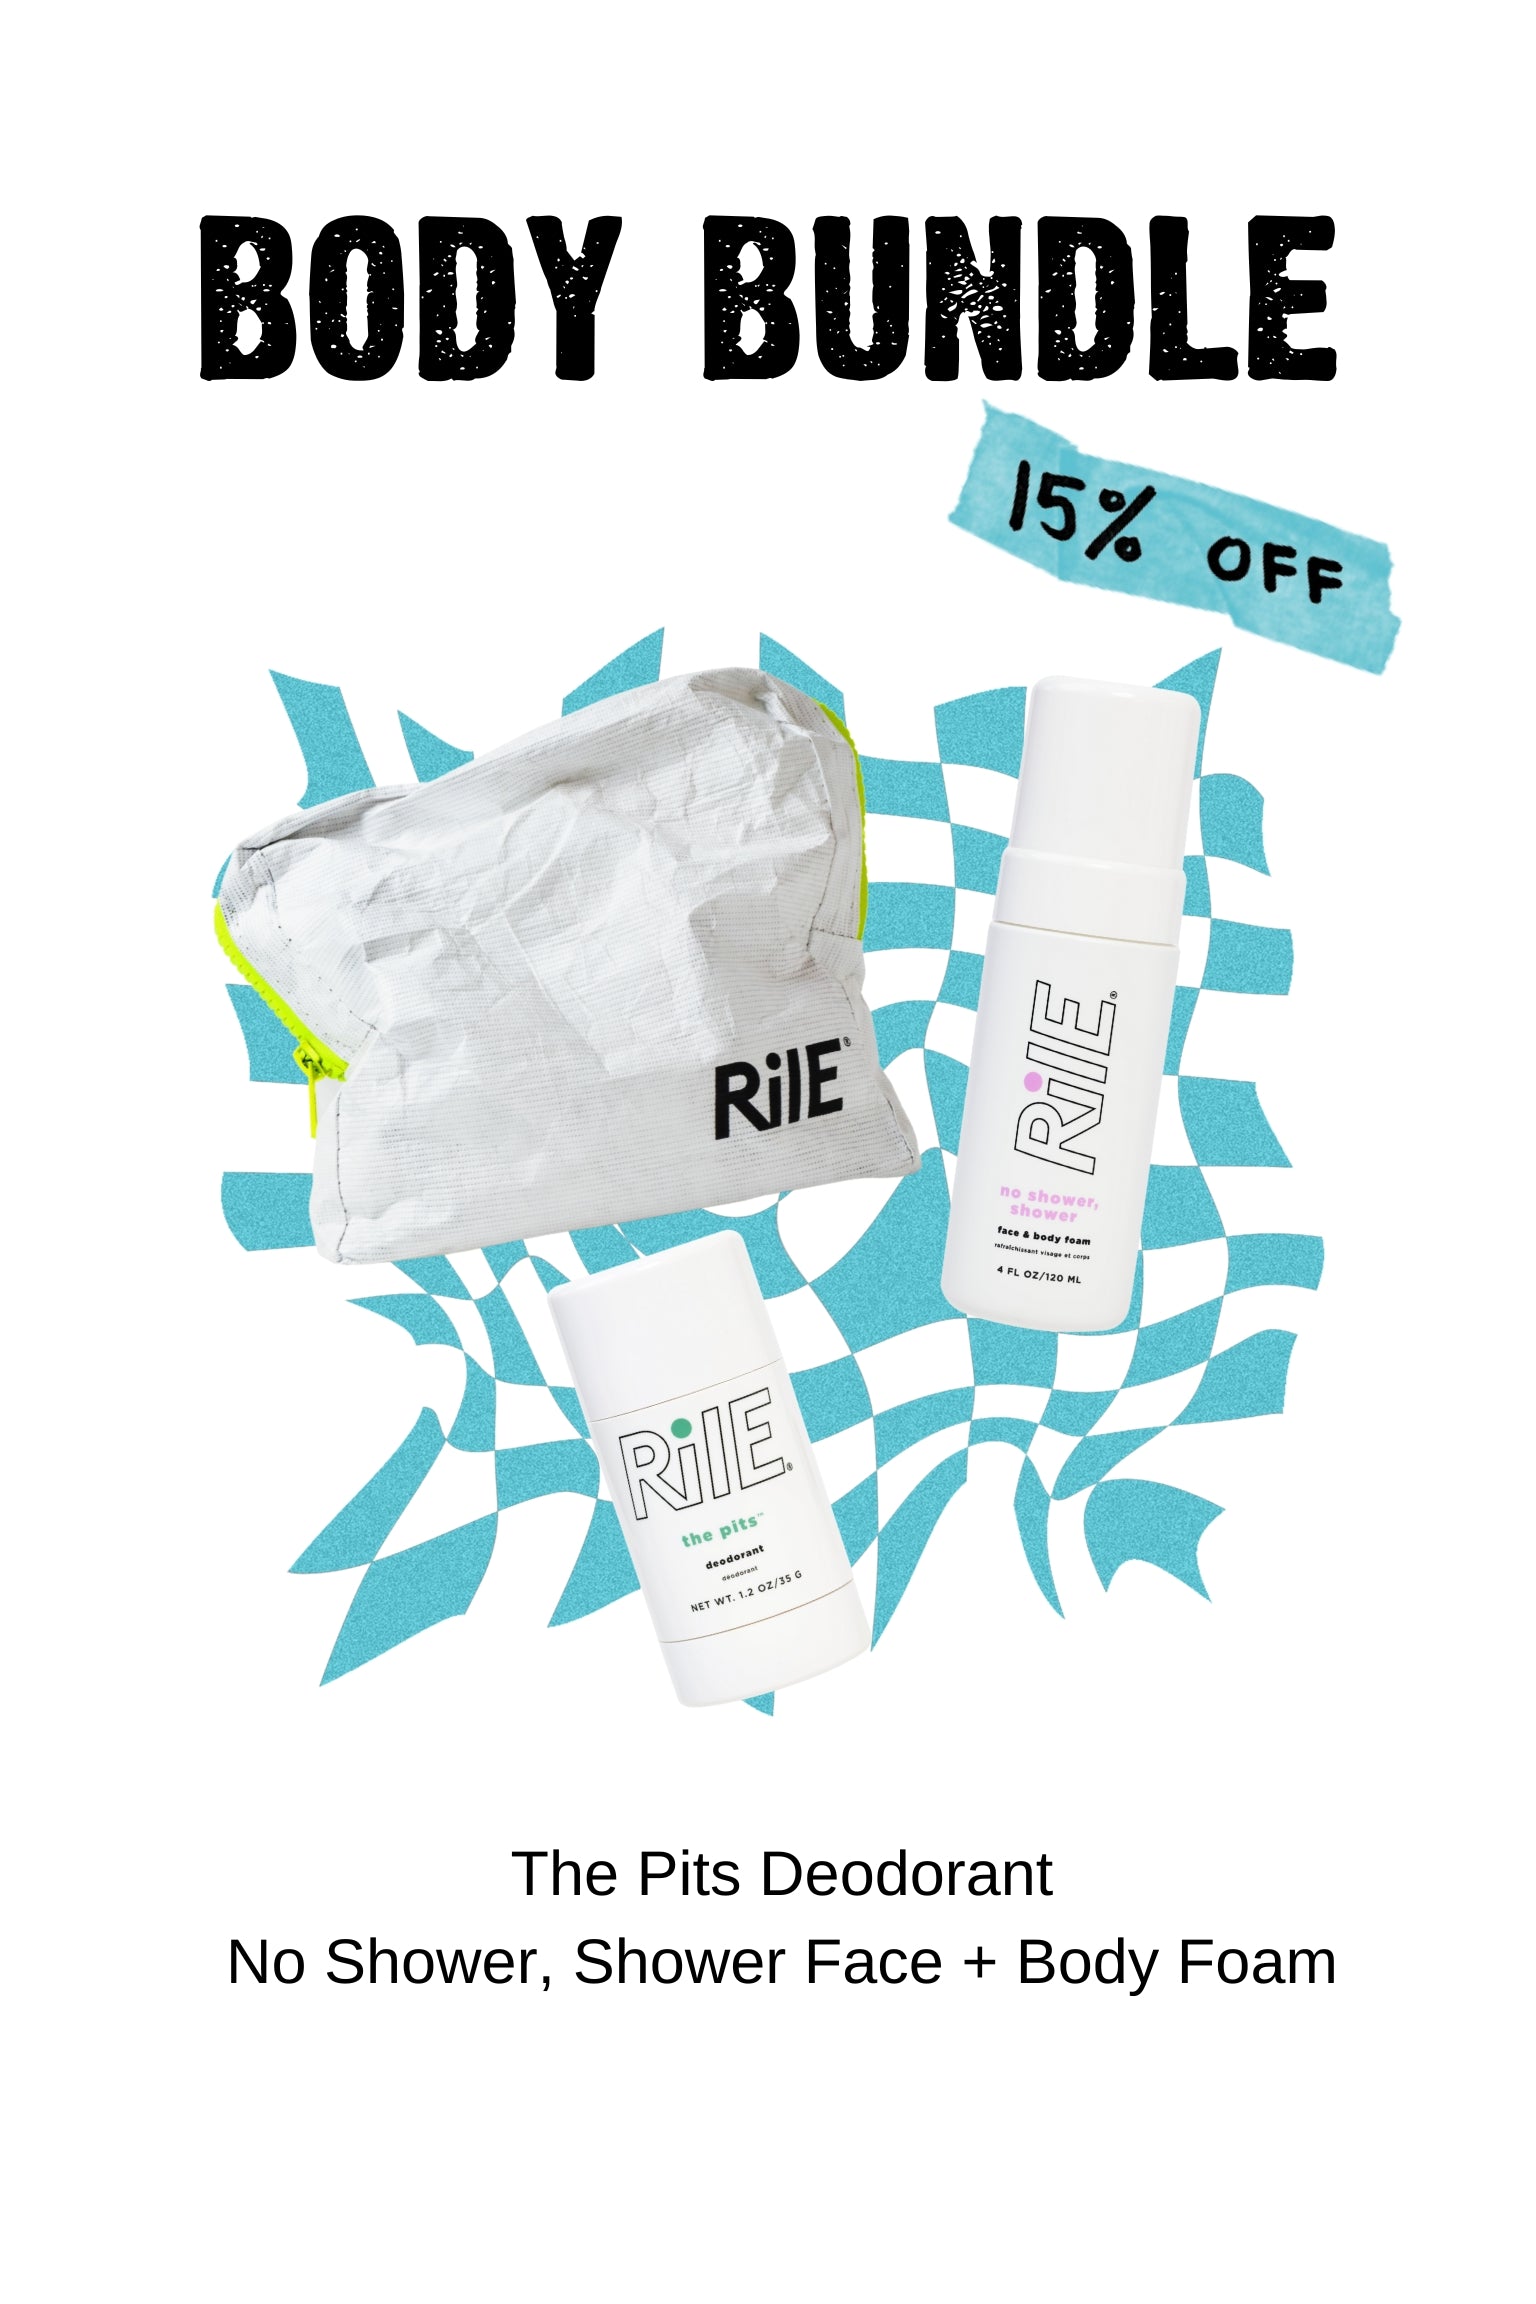 Body Bundle is shown with a Rile bag, the No Shower Shower face and body foam and the deodorant. The 15% discount and free shipping is highlighted.